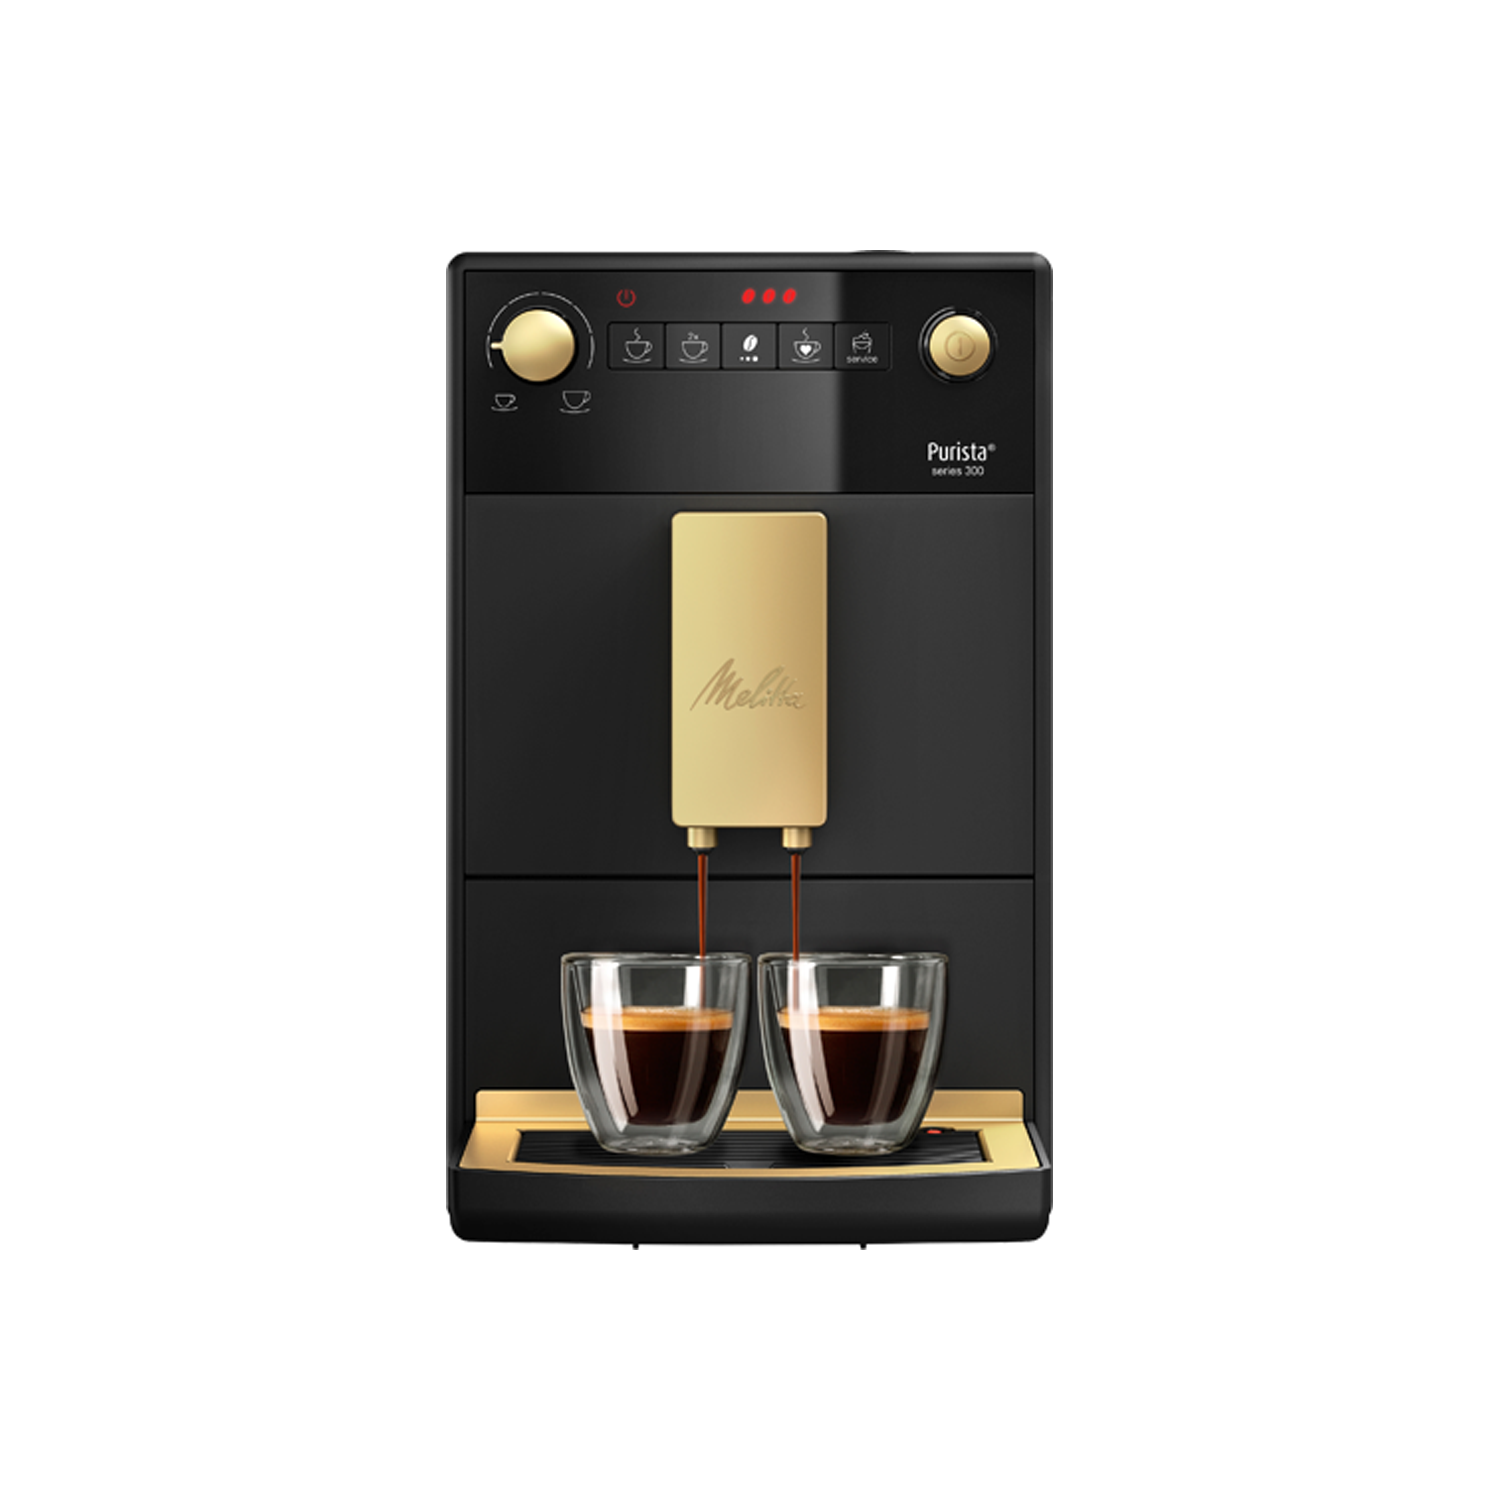 Refurbished Melitta 6768872 Purista Limited Edition Bean To Cup Coffee Machine Black & Gold